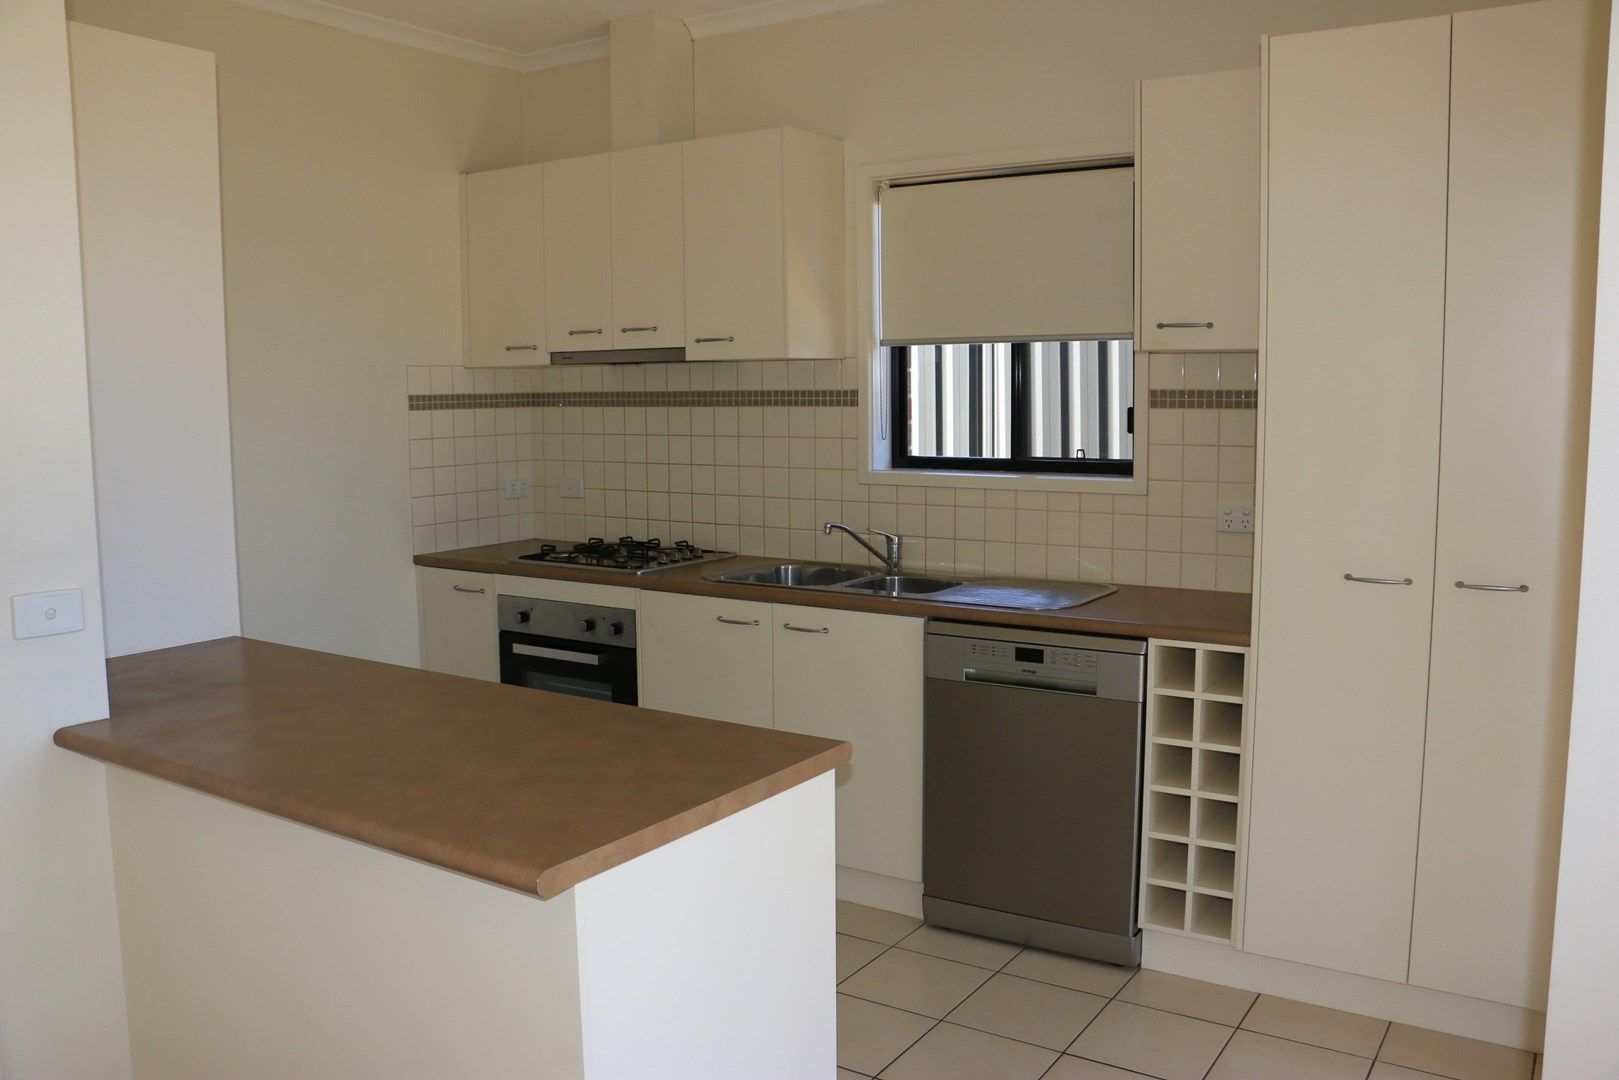 2 bedrooms Townhouse in 4/23-25 Prouses Road BENDIGO VIC, 3550